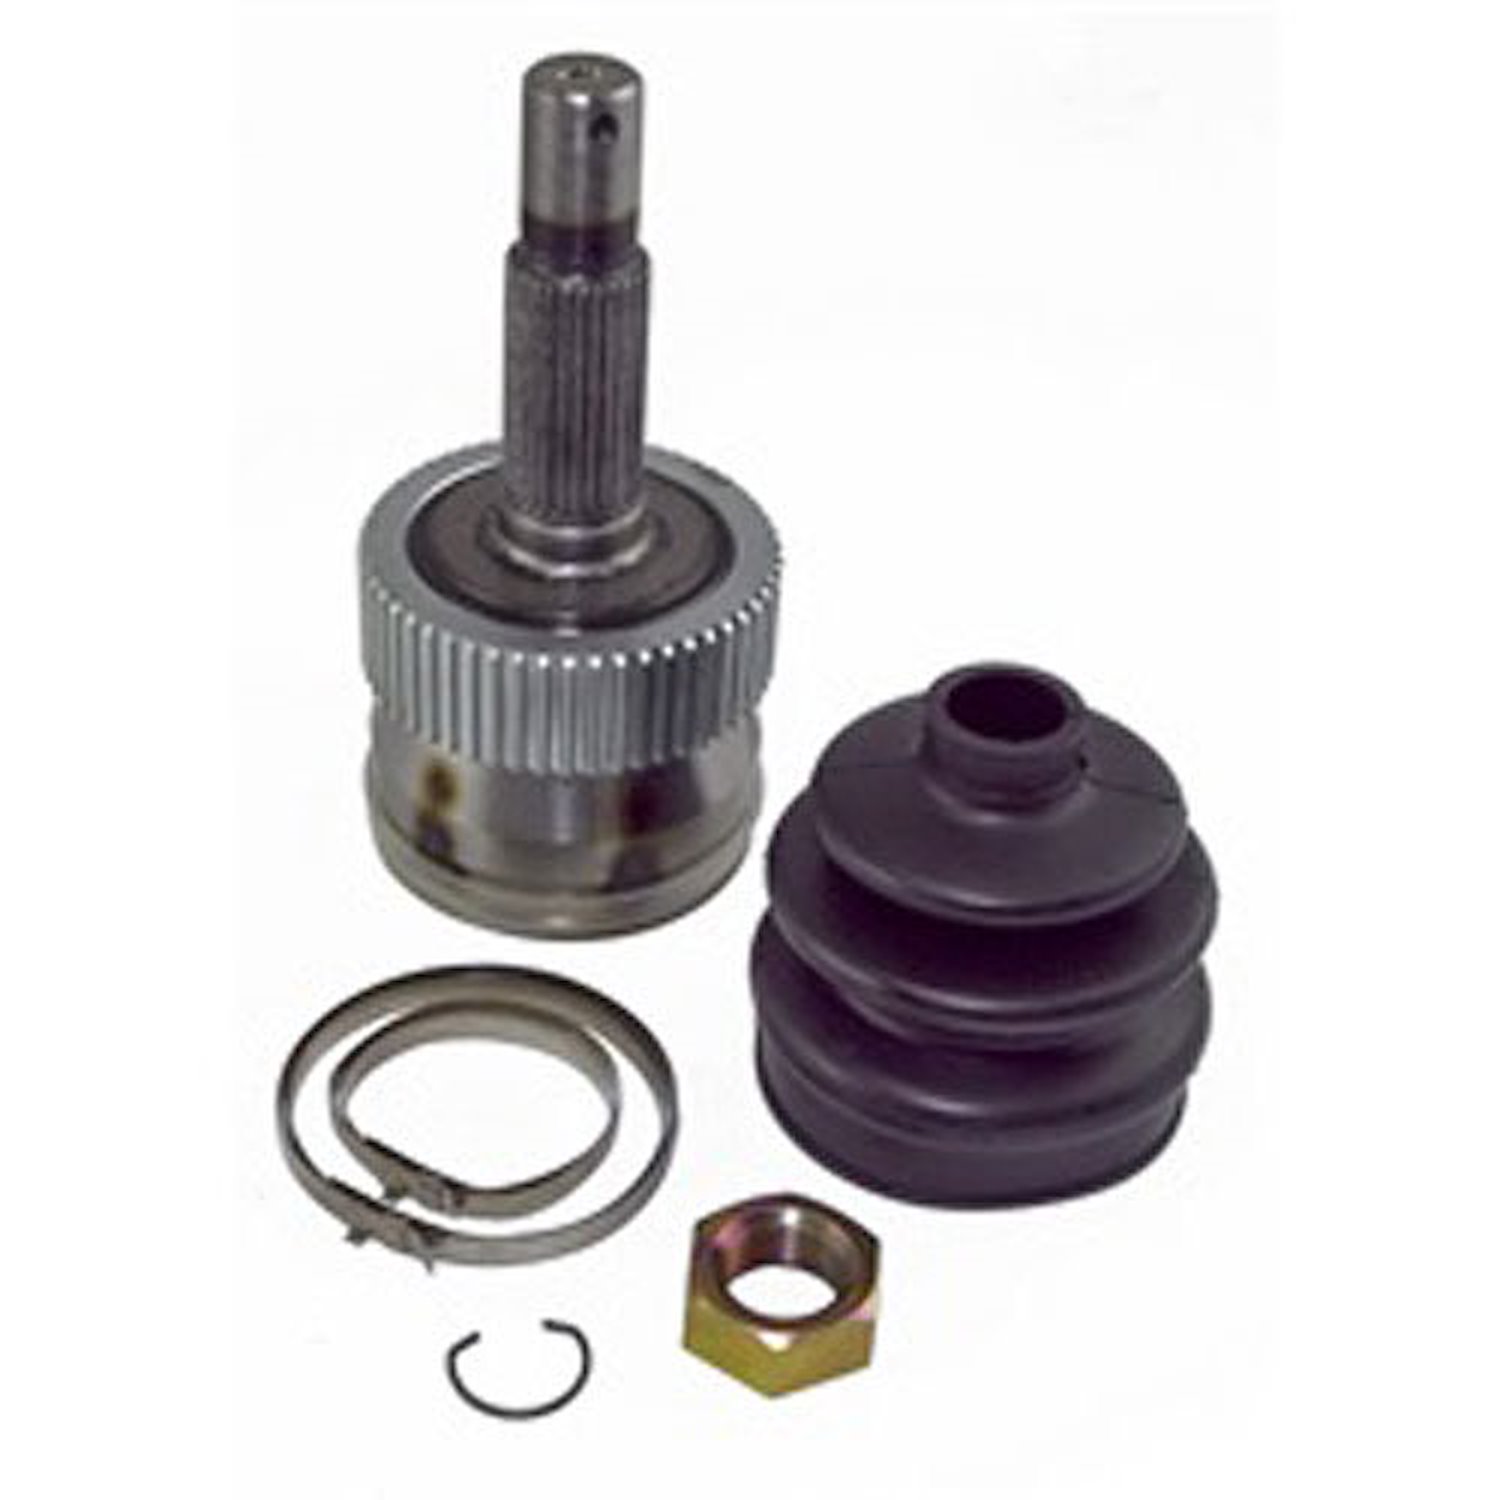 This rear driveshaft CV Joint kit from Omix-ADA fits 05-10 Jeep Grand Cherokee WK . Genuine Spicer brand.